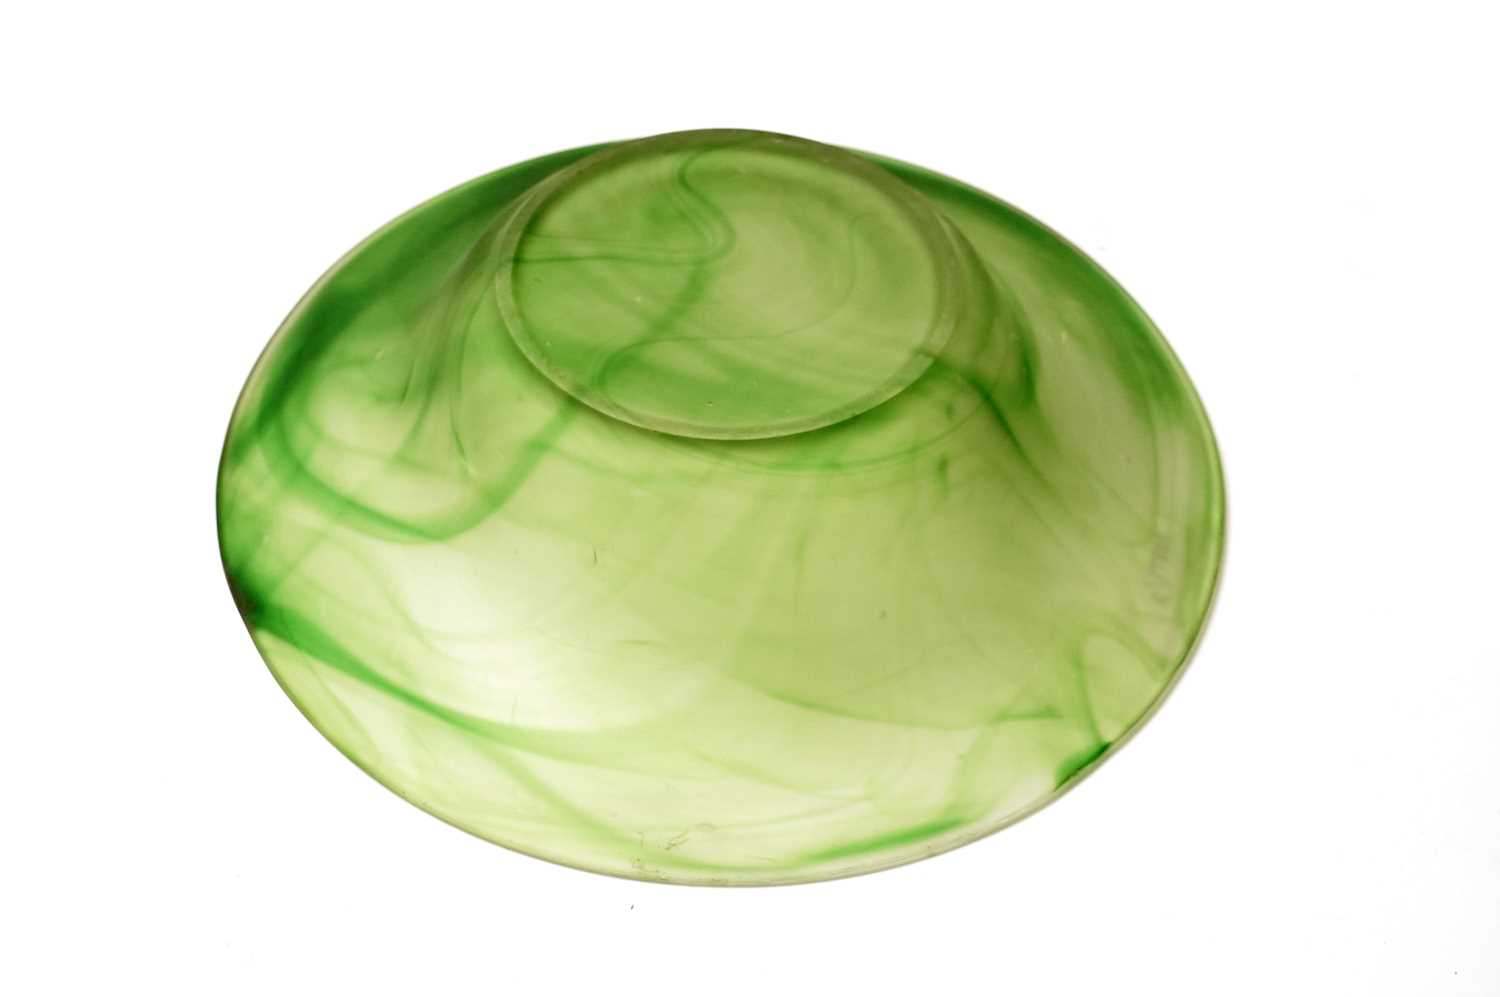 A 1930s George Davidson cloud glass bowl in green and a green glass rose bowl - Image 3 of 4